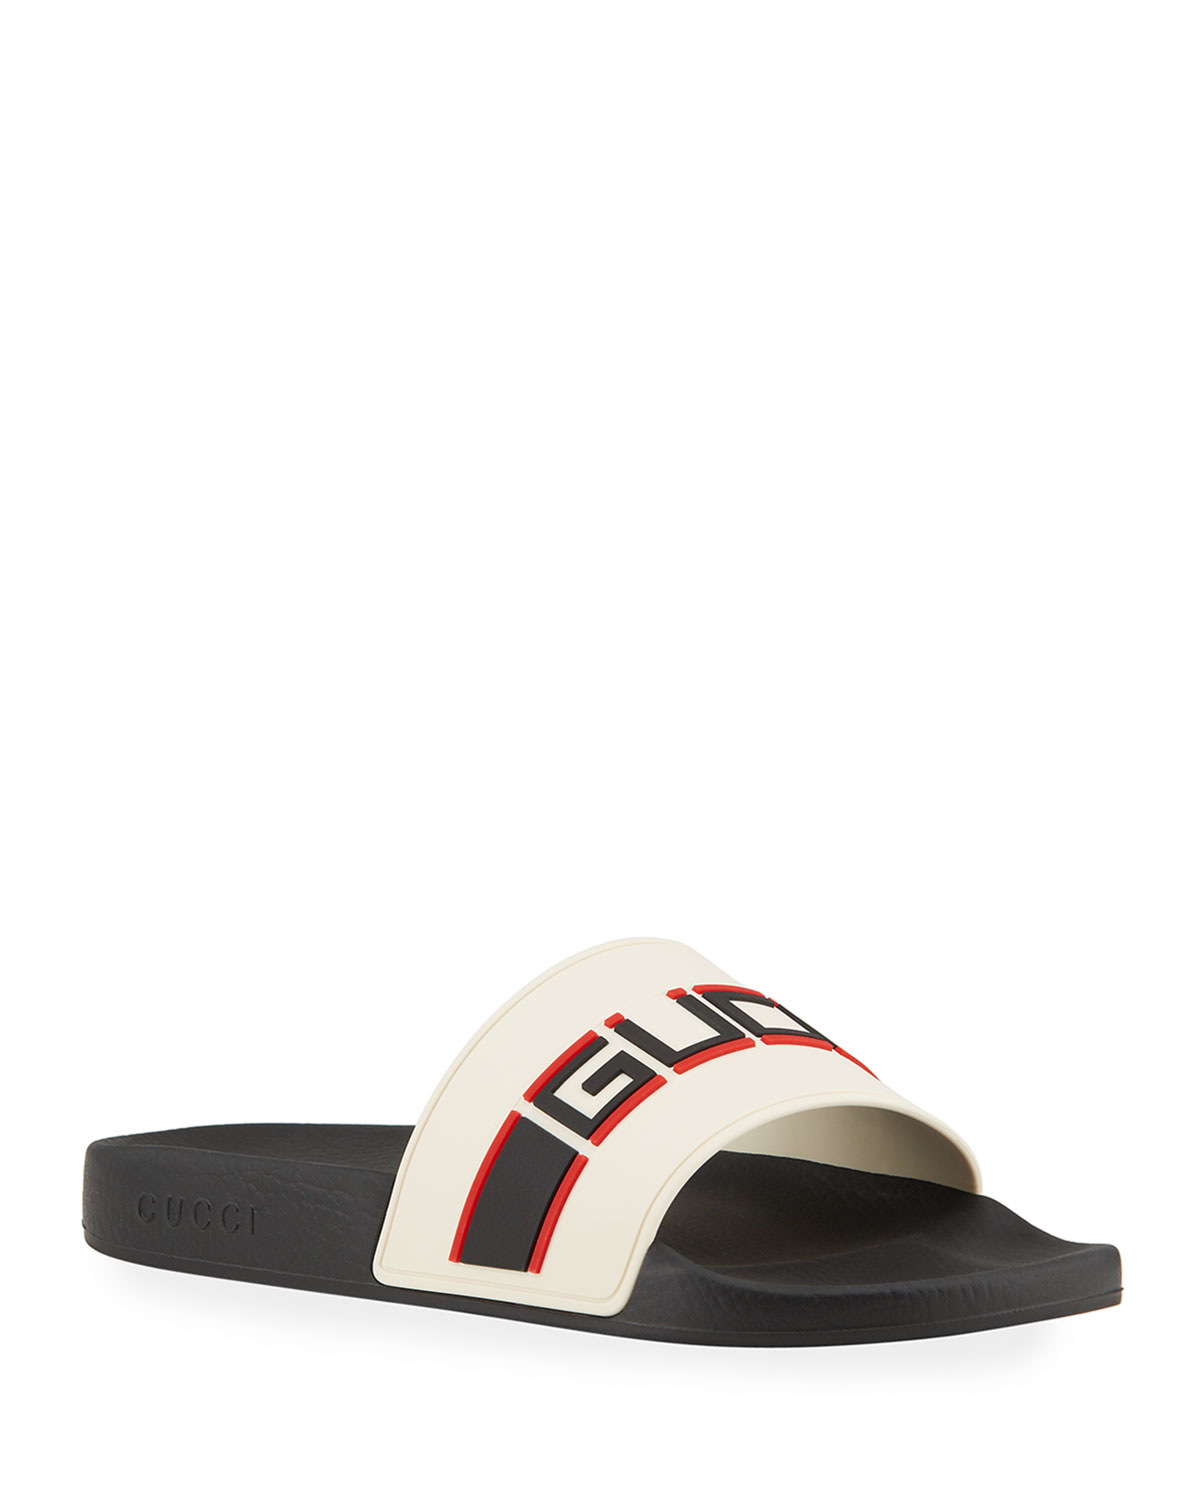 Gucci Stripe Rubber Slide Sandal Red Top Sellers, UP TO 58% OFF 